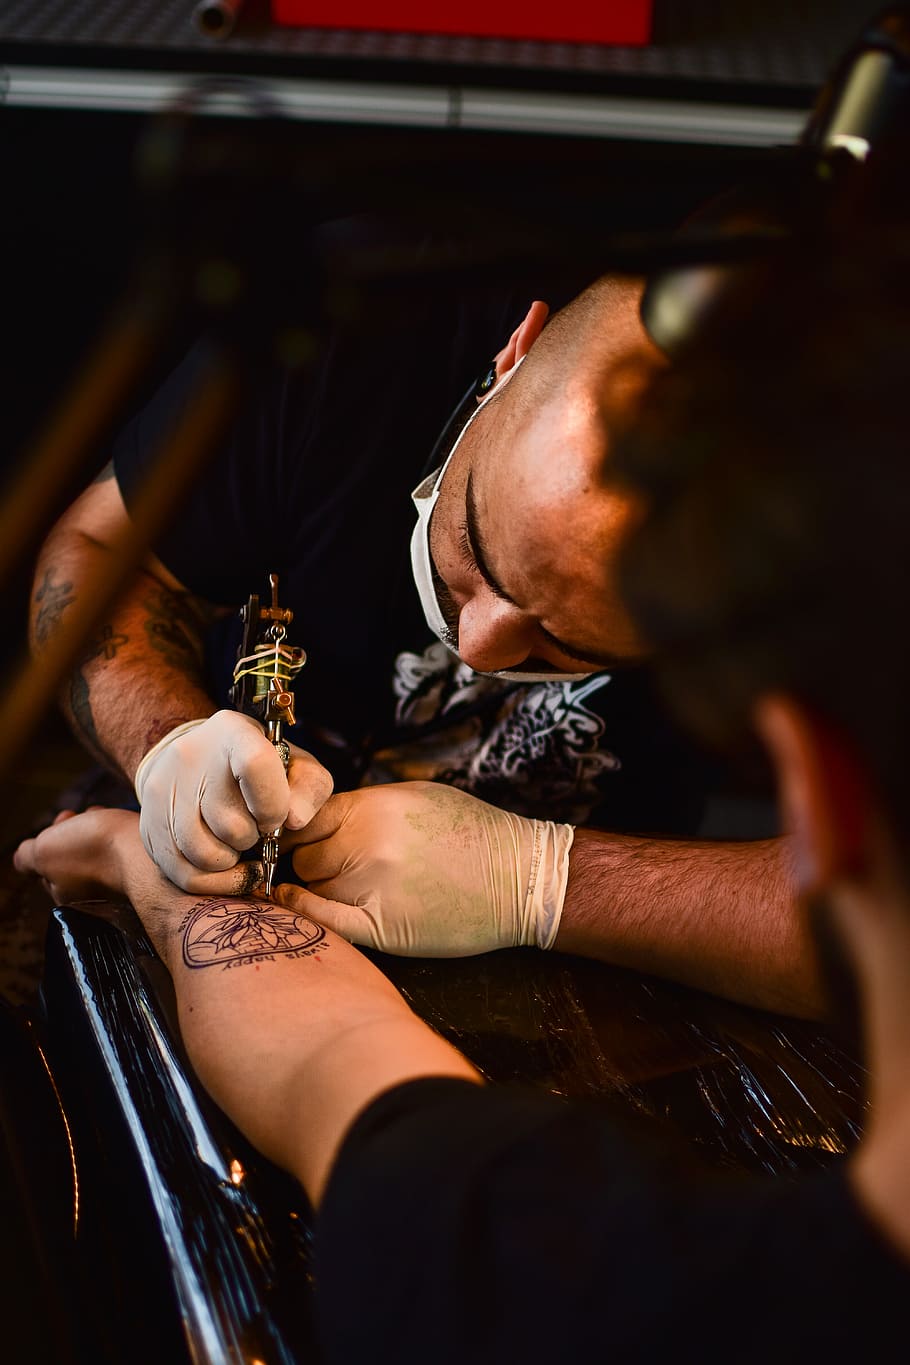 man doing tattoo on human arm, man tattooing person on his left arm